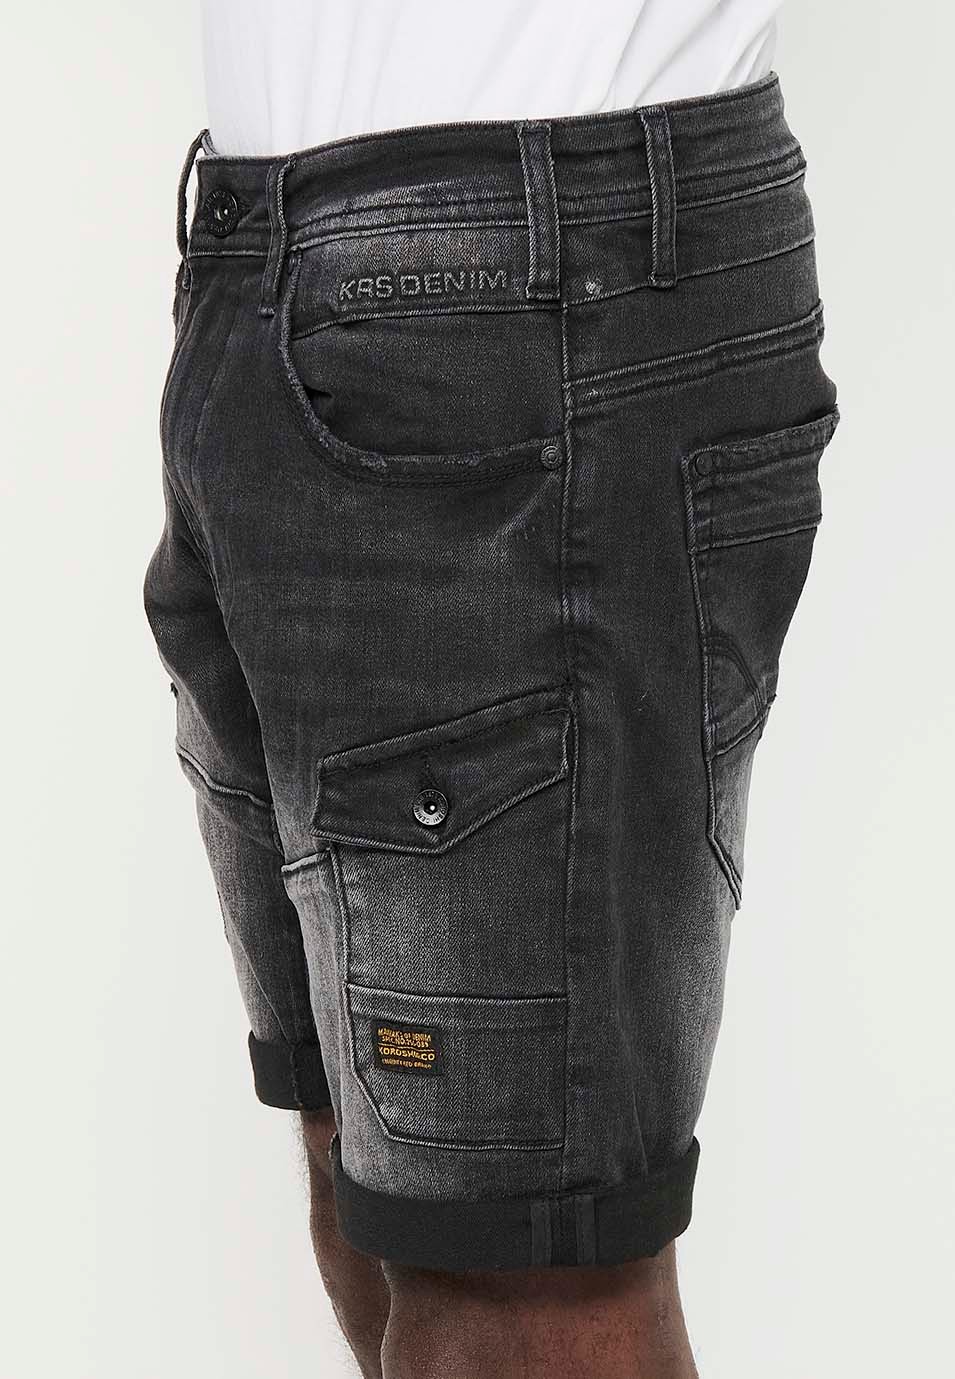 Shorts with Turn-up Finish and Front Closure with Zipper and Button with Five Pockets, One Pocket Pocket and Front Details in Black for Men 1